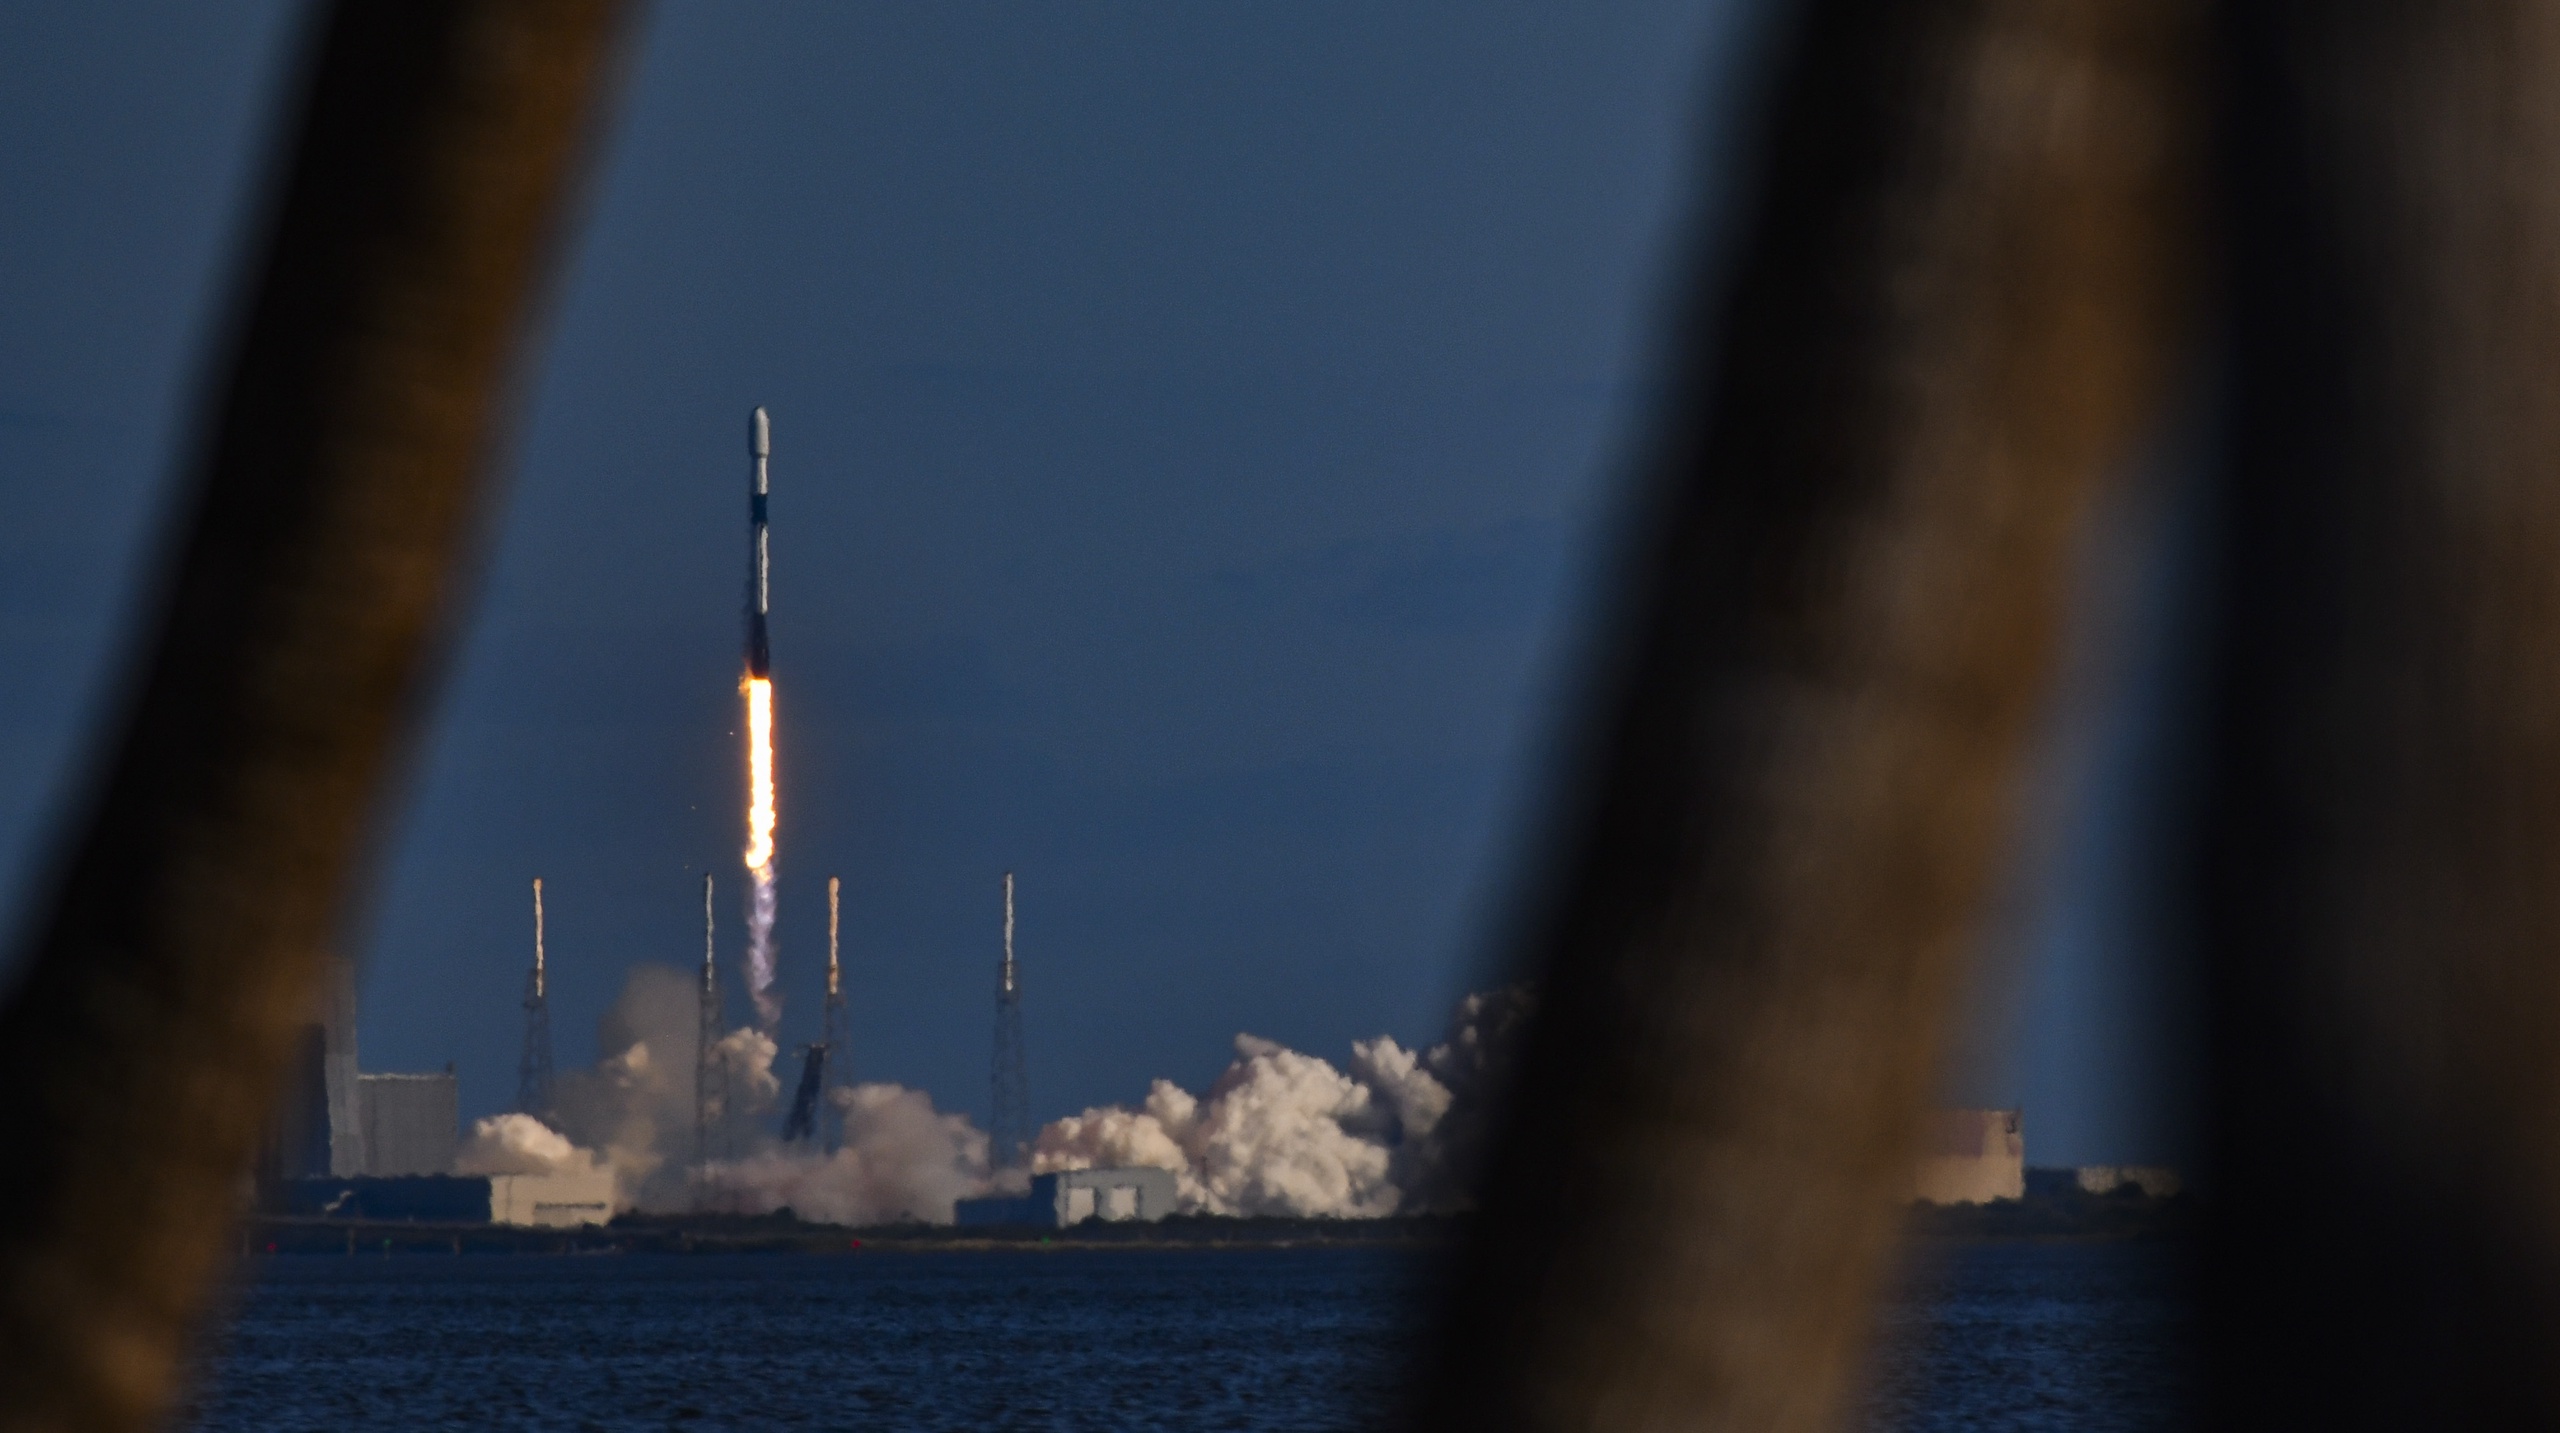 The first SpaceX launch of 2023 took place last Monday from Cape Canaveral, Florida, and it's a real first. 